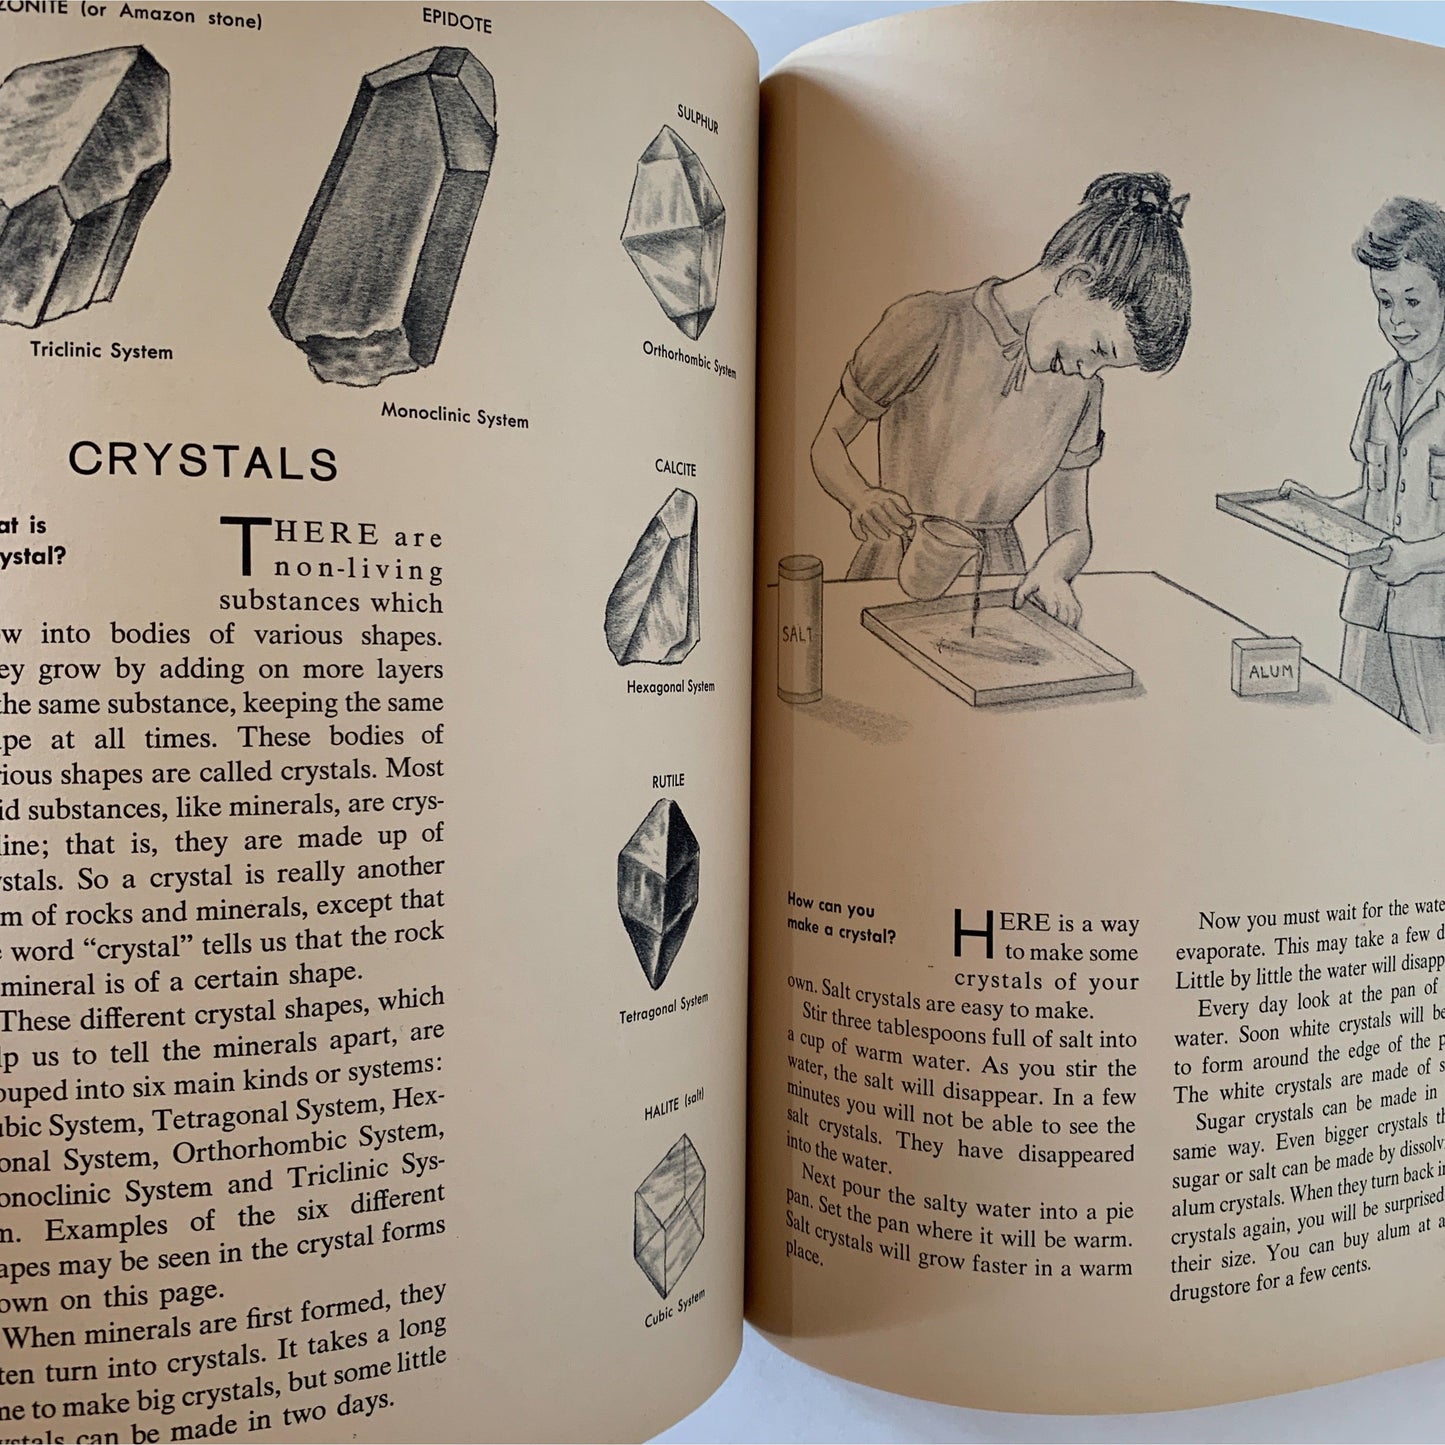 The How and Why Wonder Book of Rocks and Minerals, 1960